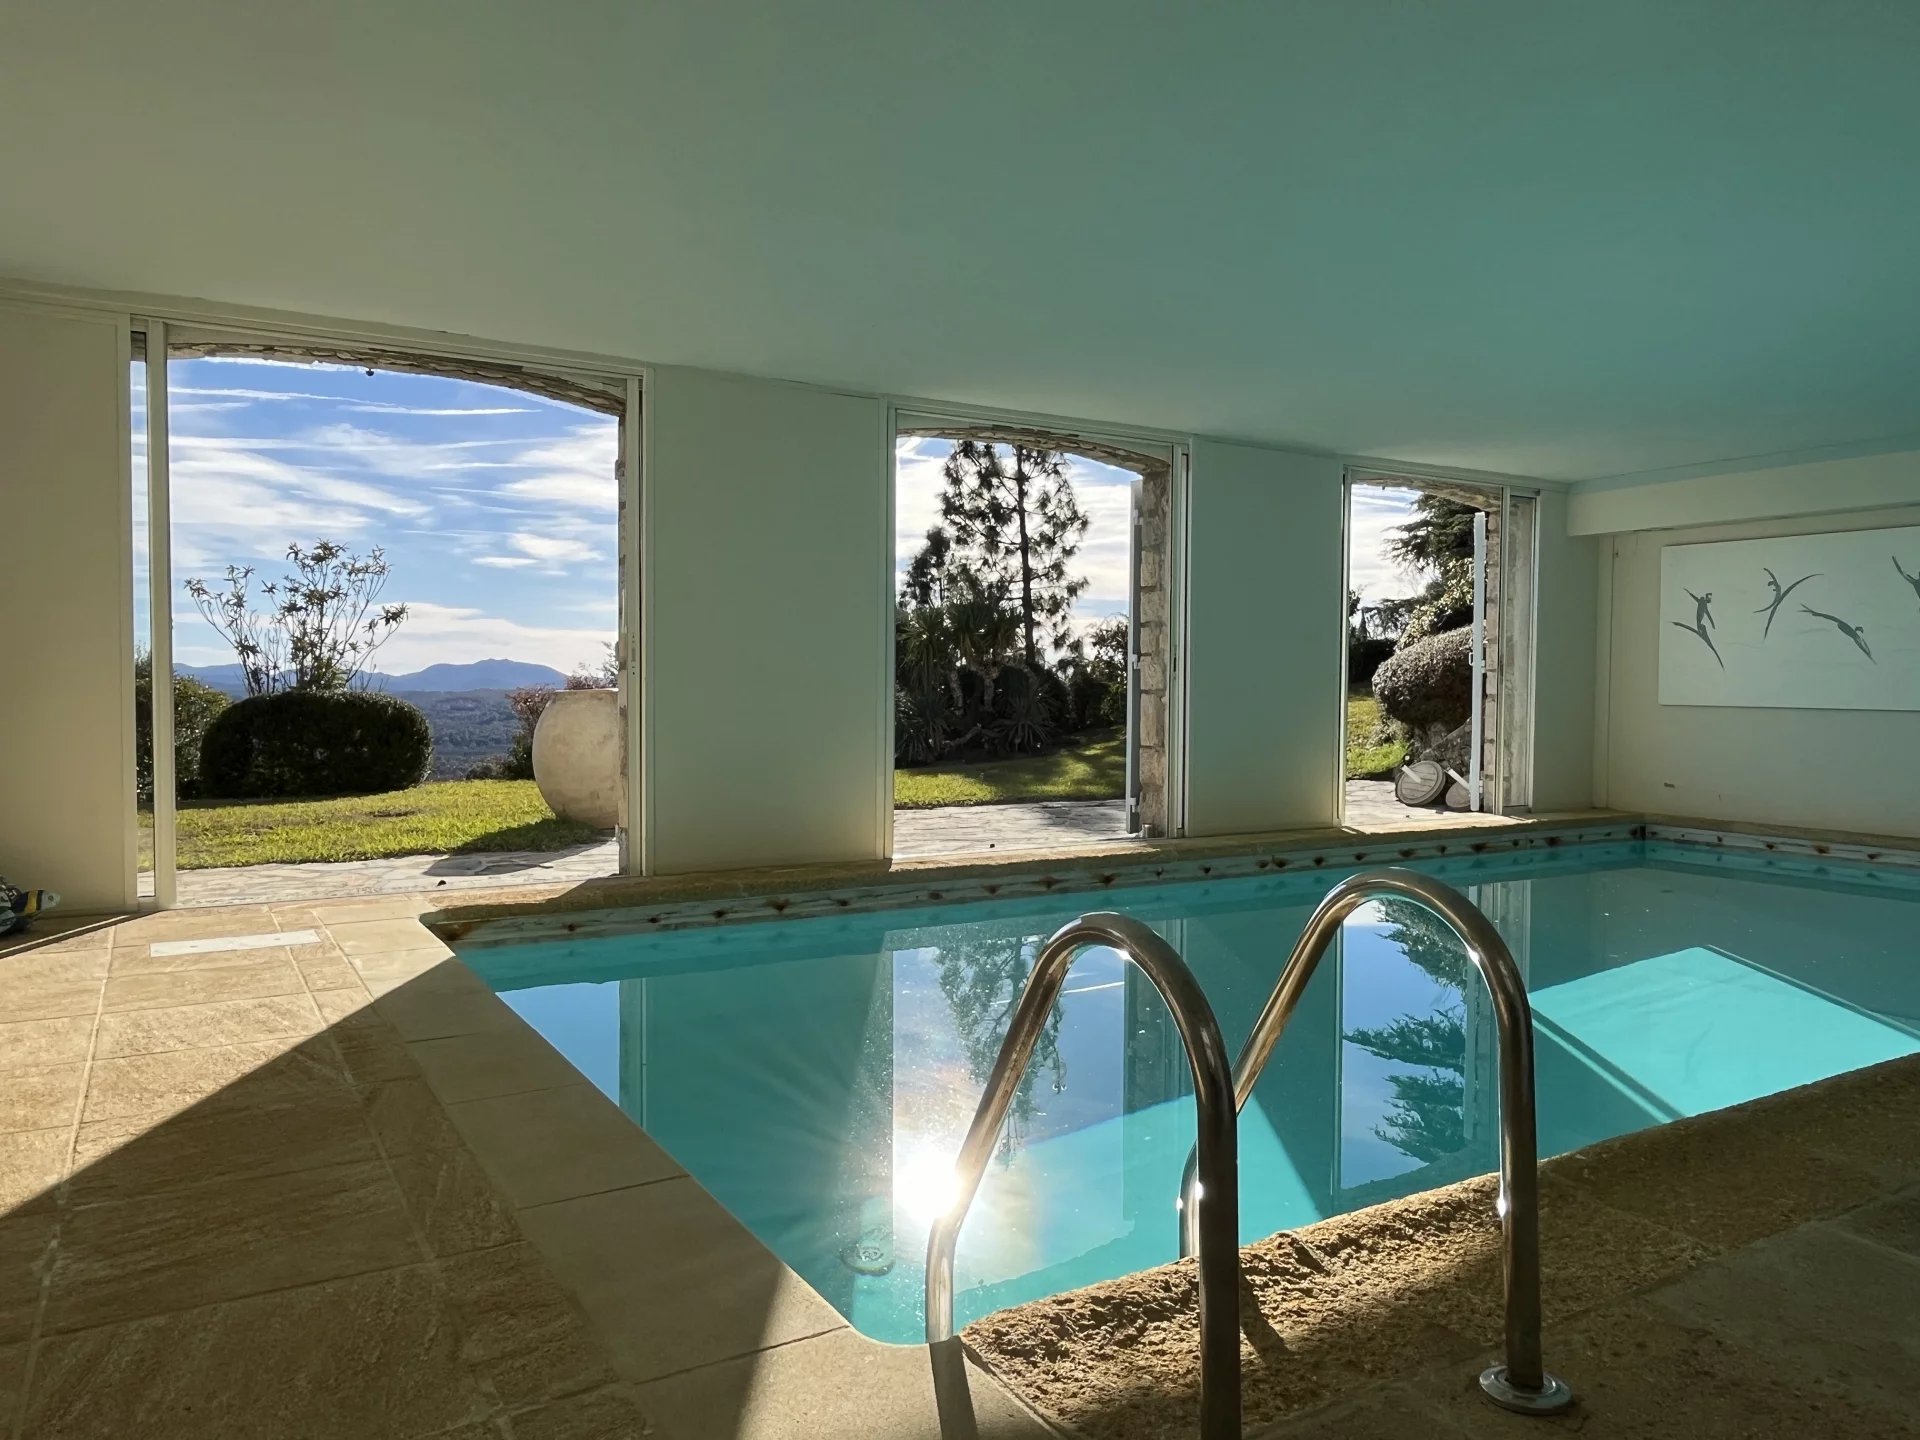 Great 6 bedroom villa with breathtaking views - Tourrettes